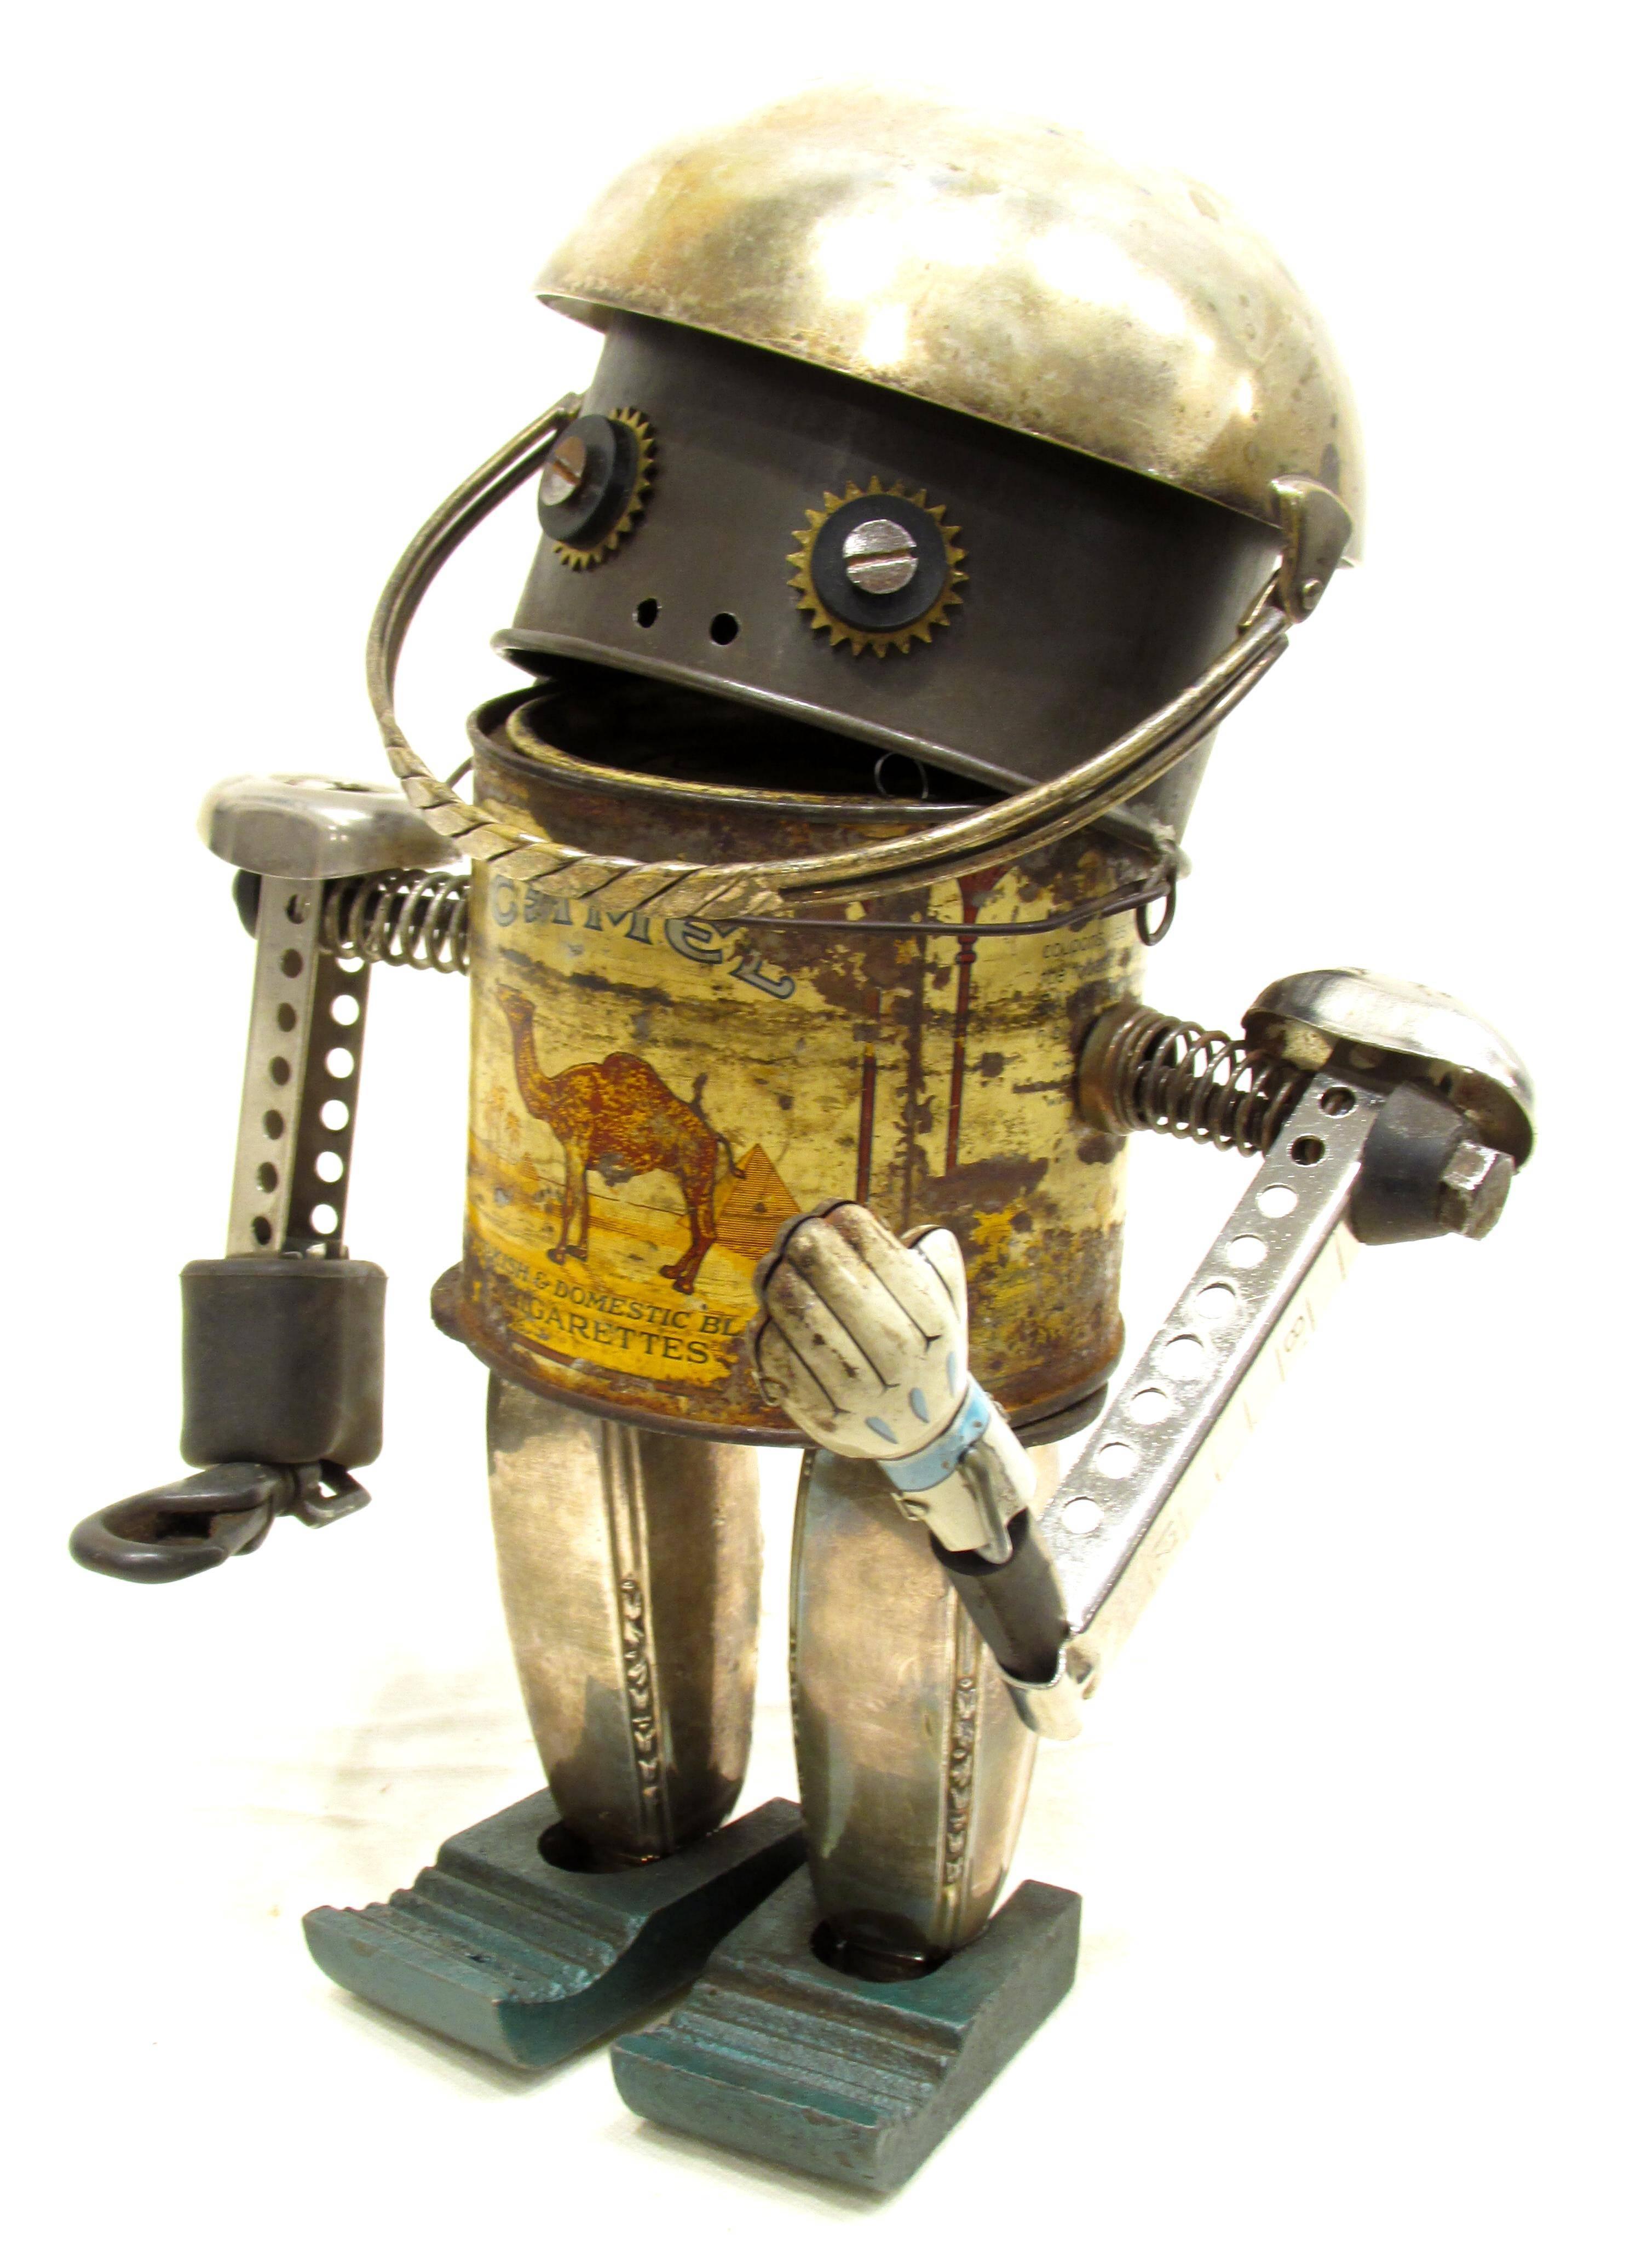 Artist made robot from old antique Camel cigarettes tin and other objects artist signed with monogram.